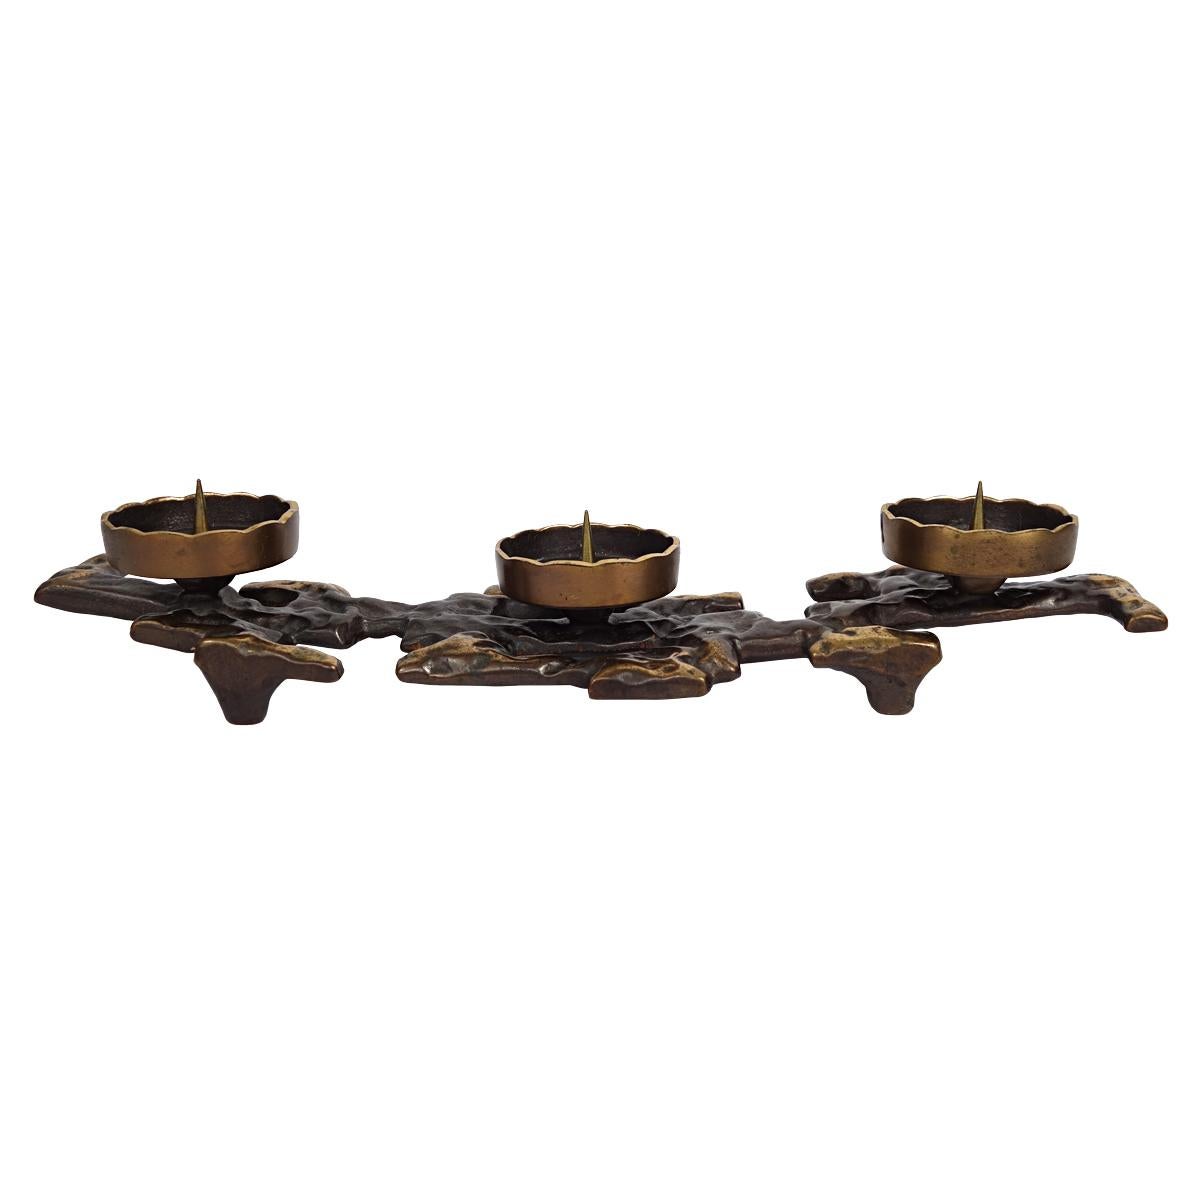 Stylish bronze candlestick of the rough Brutalist kind. 
It almost seems as if the molten bronze did not go into a mold but found its own way to shape up into an object. 
Four elegant feet raise the candlestick gracefully from the surface. 
Three